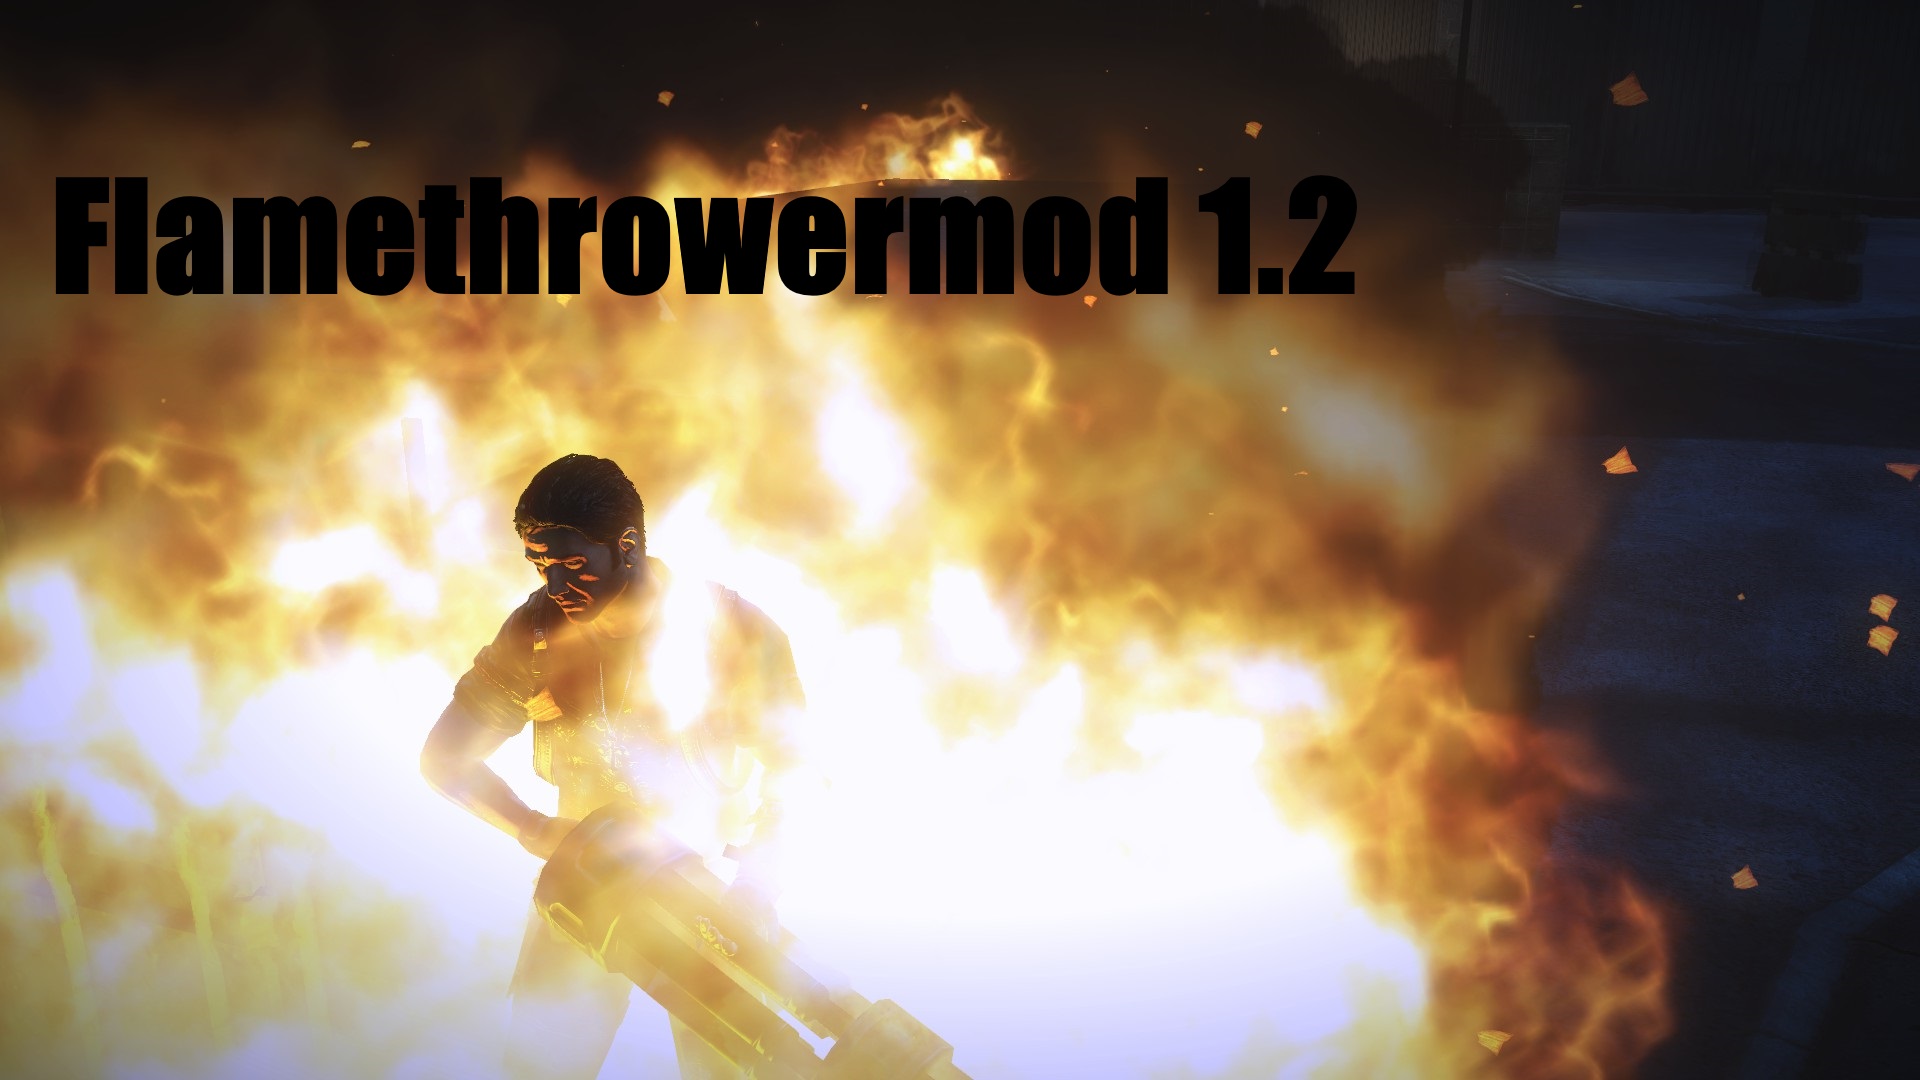 Flamethrower+new flags and textures